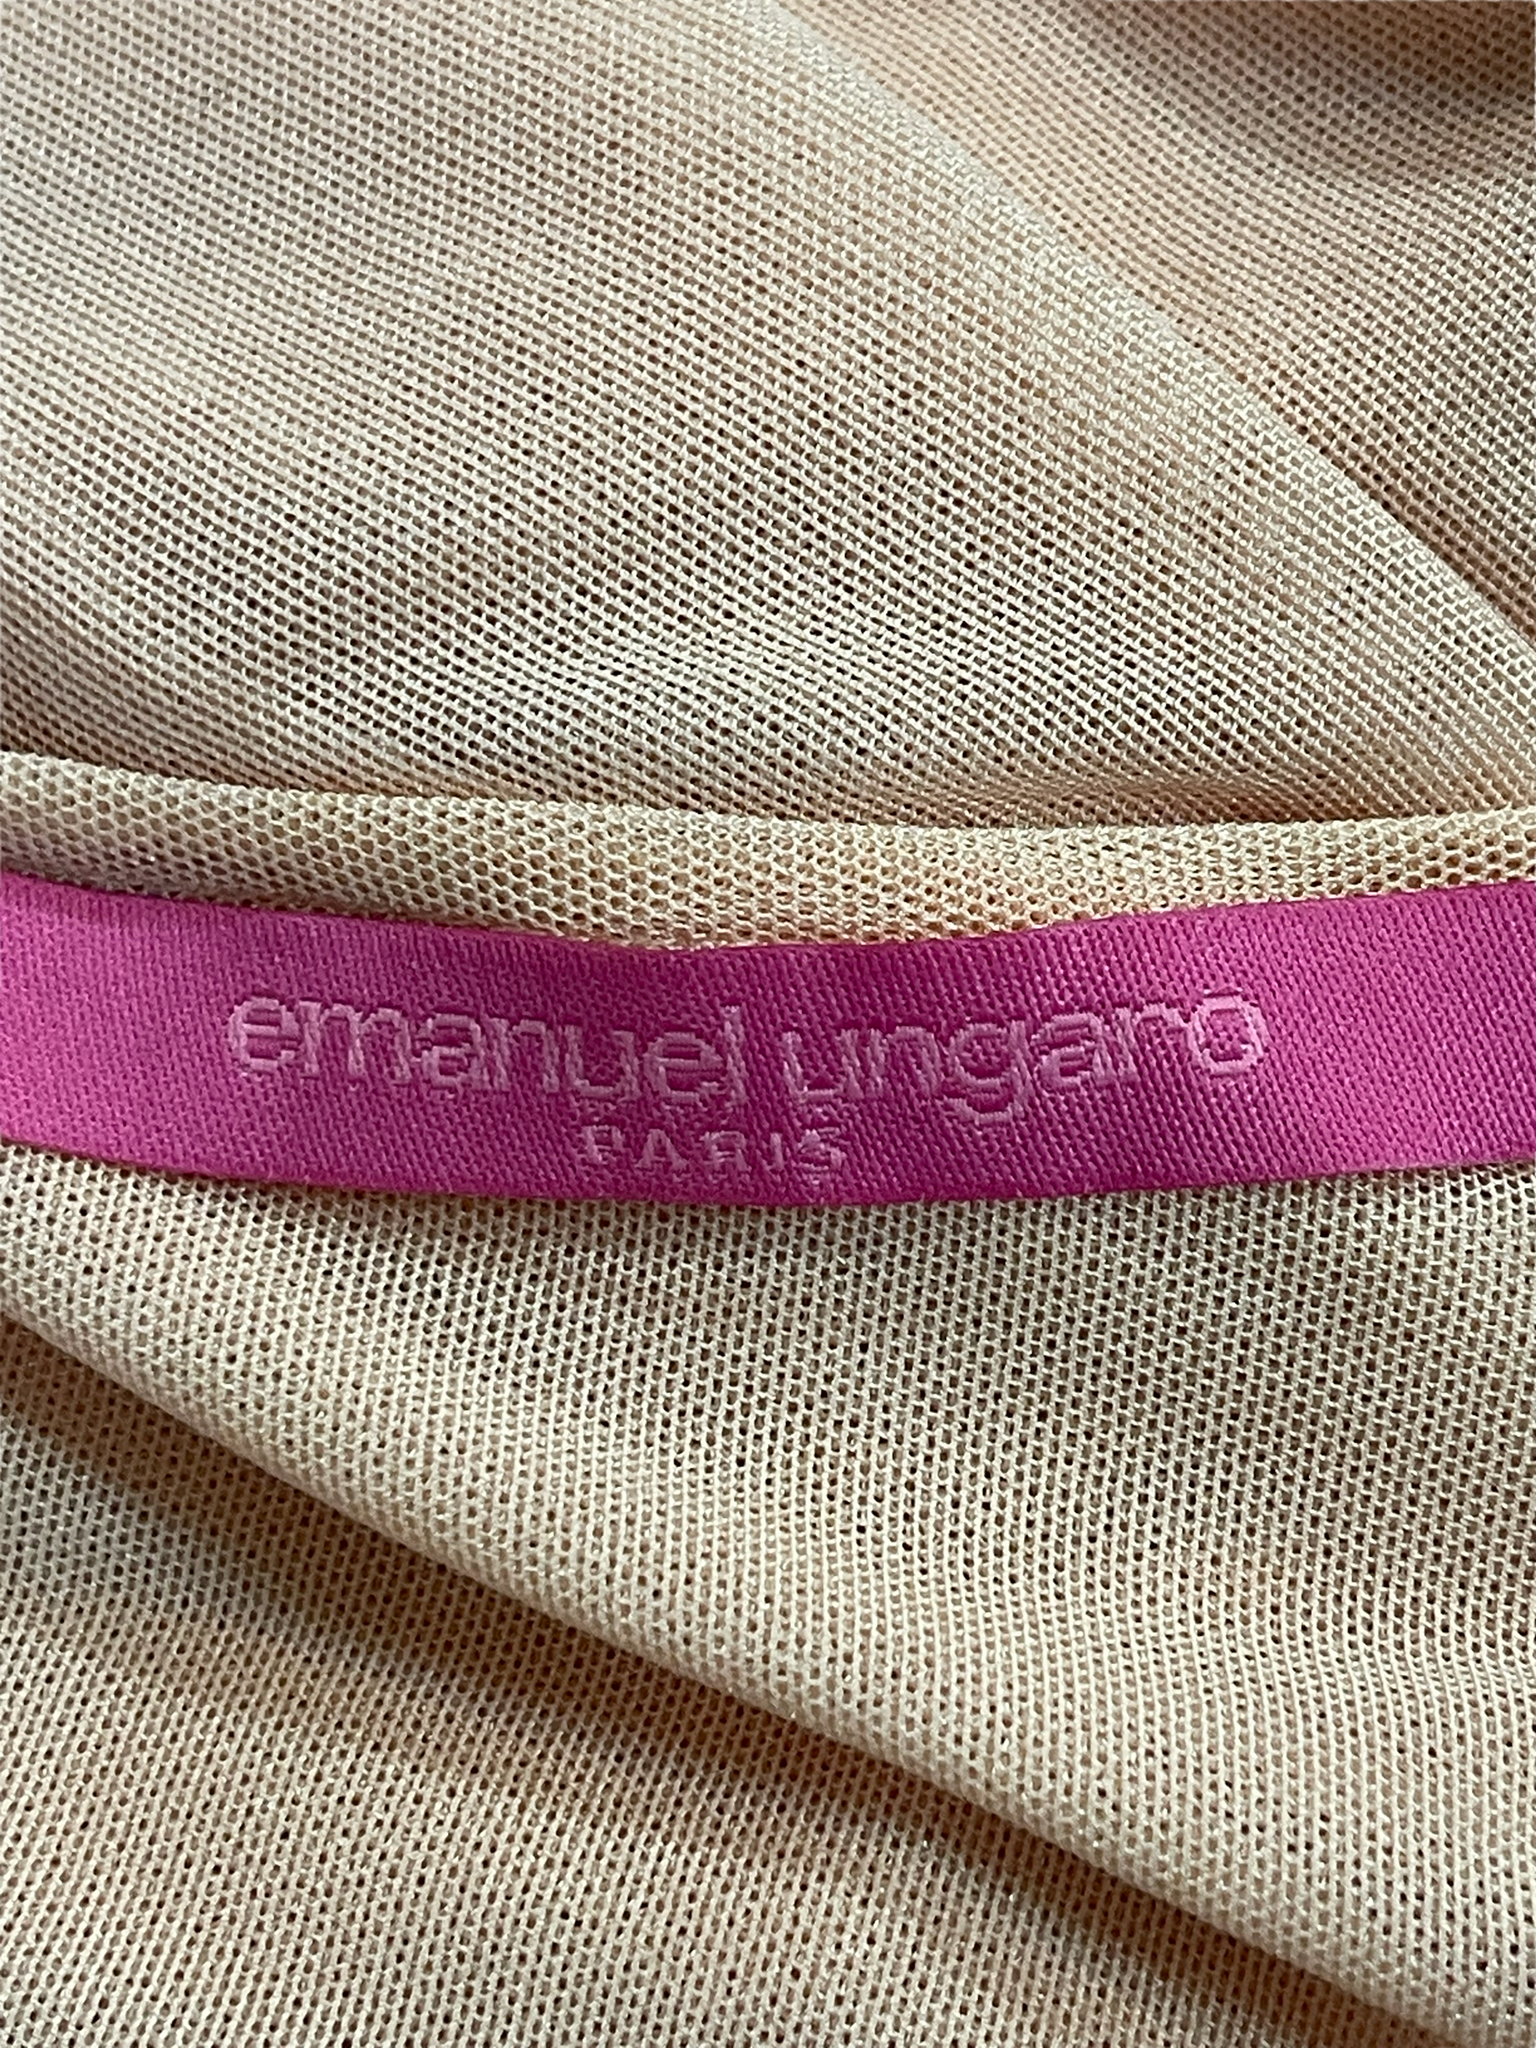 Emanuel Ungaro Early 2000s Pink Tank with oversized Rhinestone Flowers LABEL 5 of 5